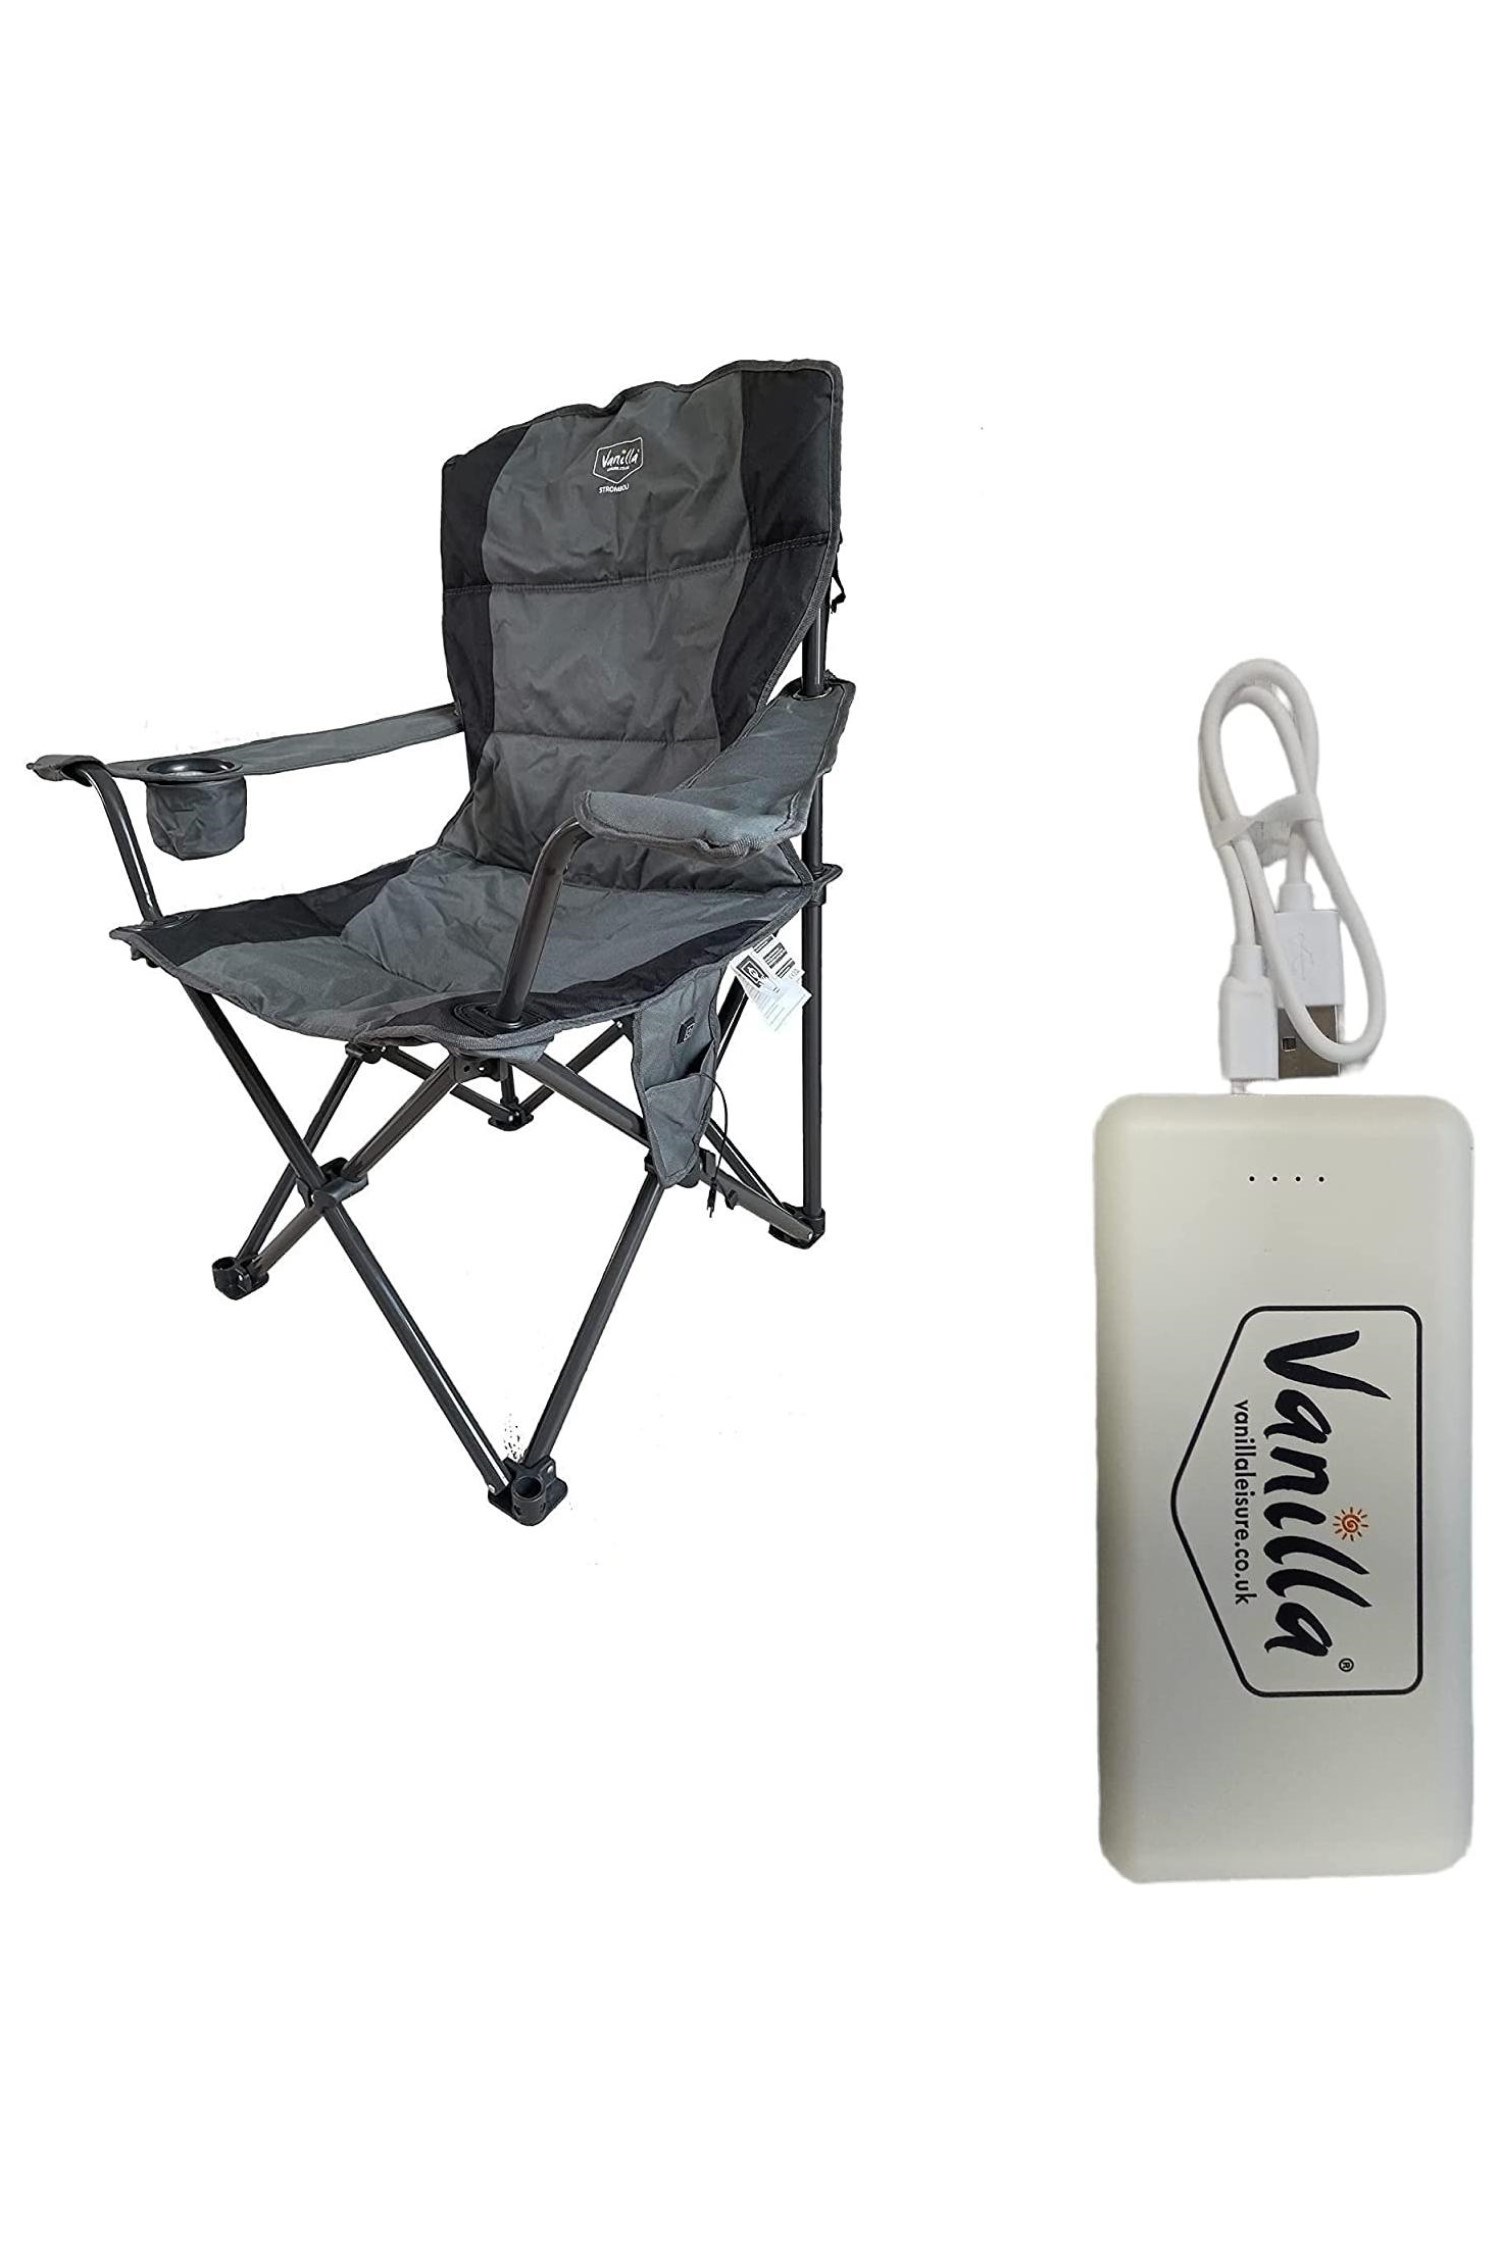 Stromboli Folding Outdoor Heated Camping Chair -